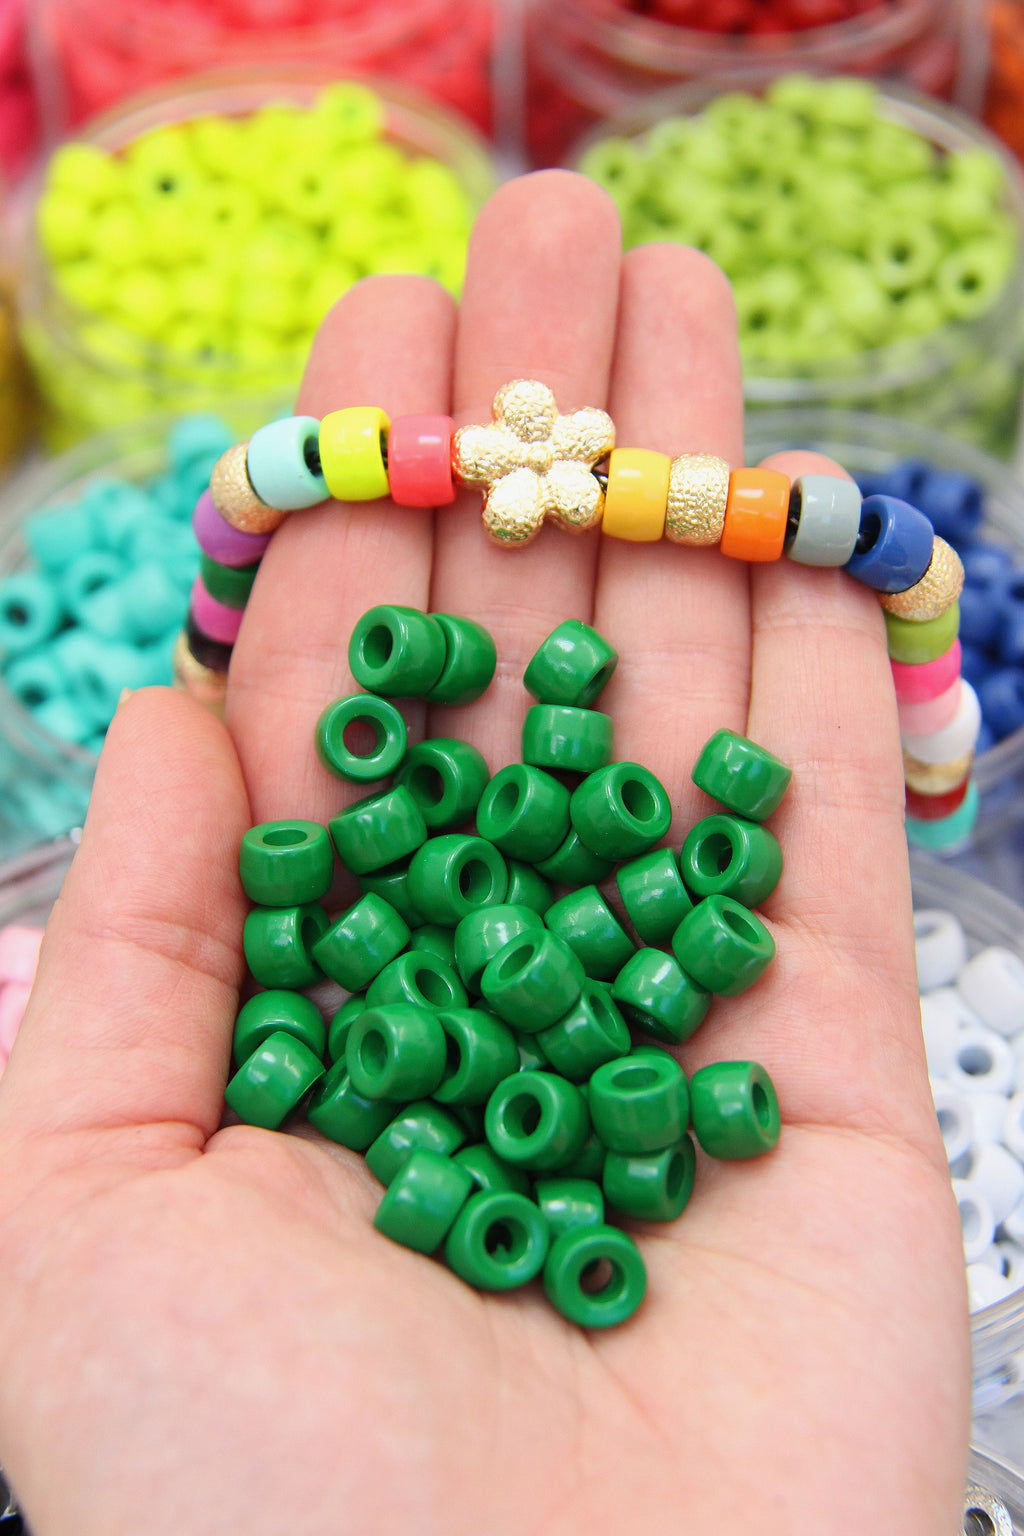 Black Archives  Pony Beads - Suppliers of Pony Beads and Craft